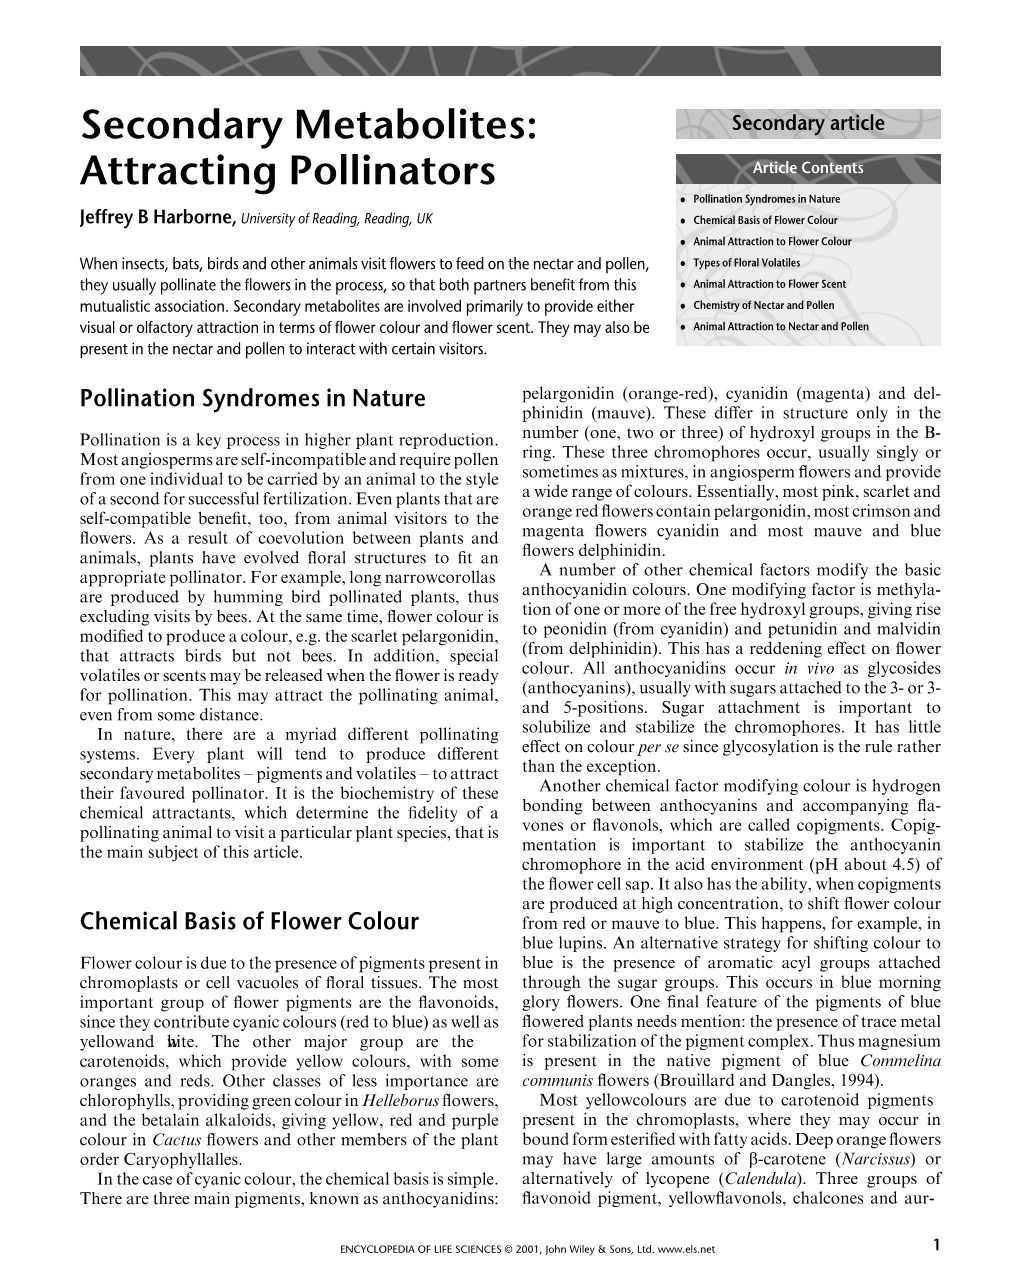 "Secondary Metabolites: Attracting Pollinators". In: Encyclopedia of Life Science